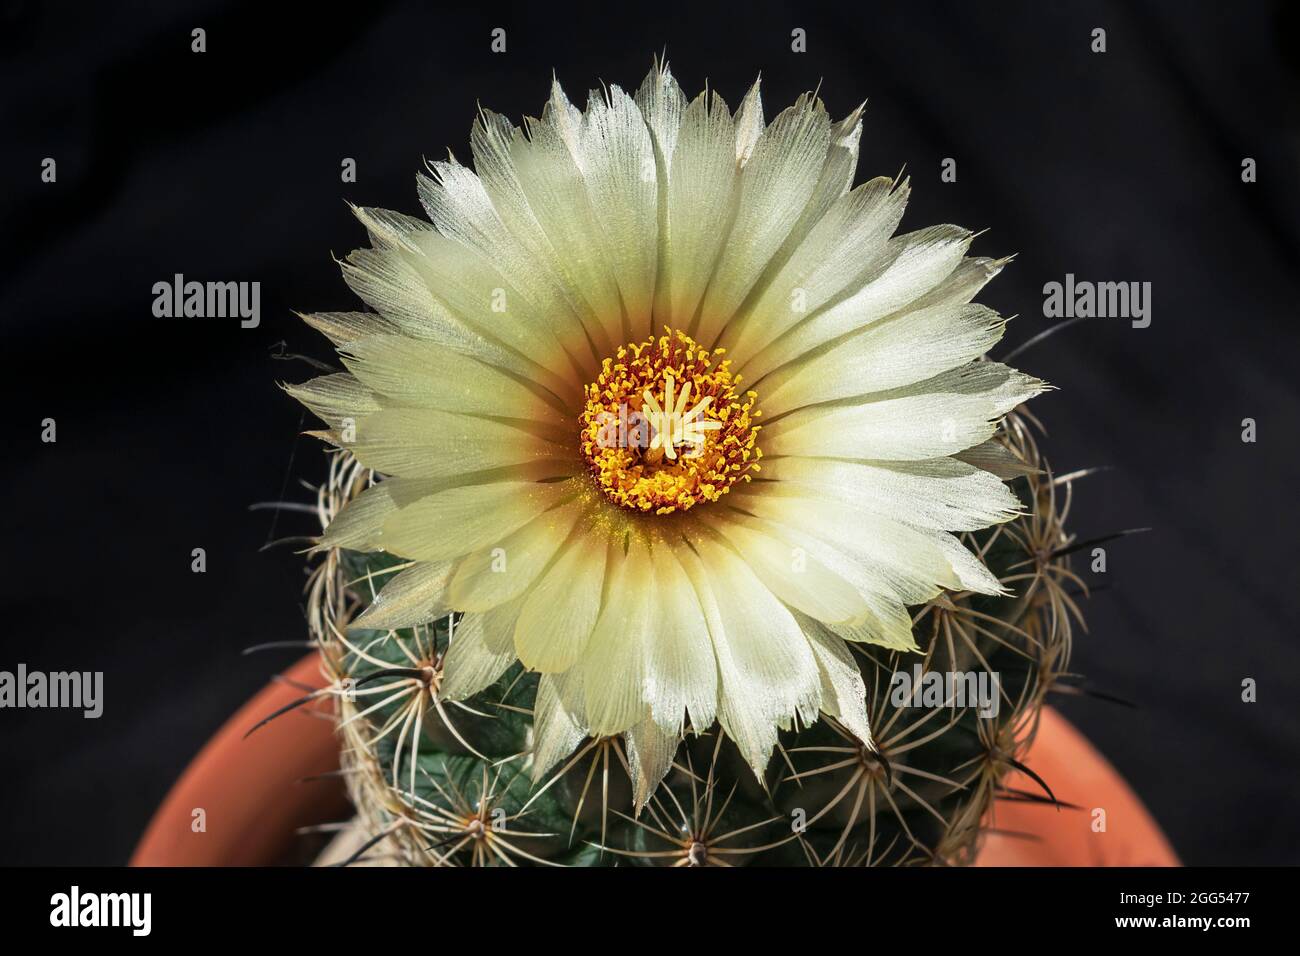 one Yellow Rhinoceos Coryphantha radians Cactus flower on top of the potted plant with a black background Stock Photo